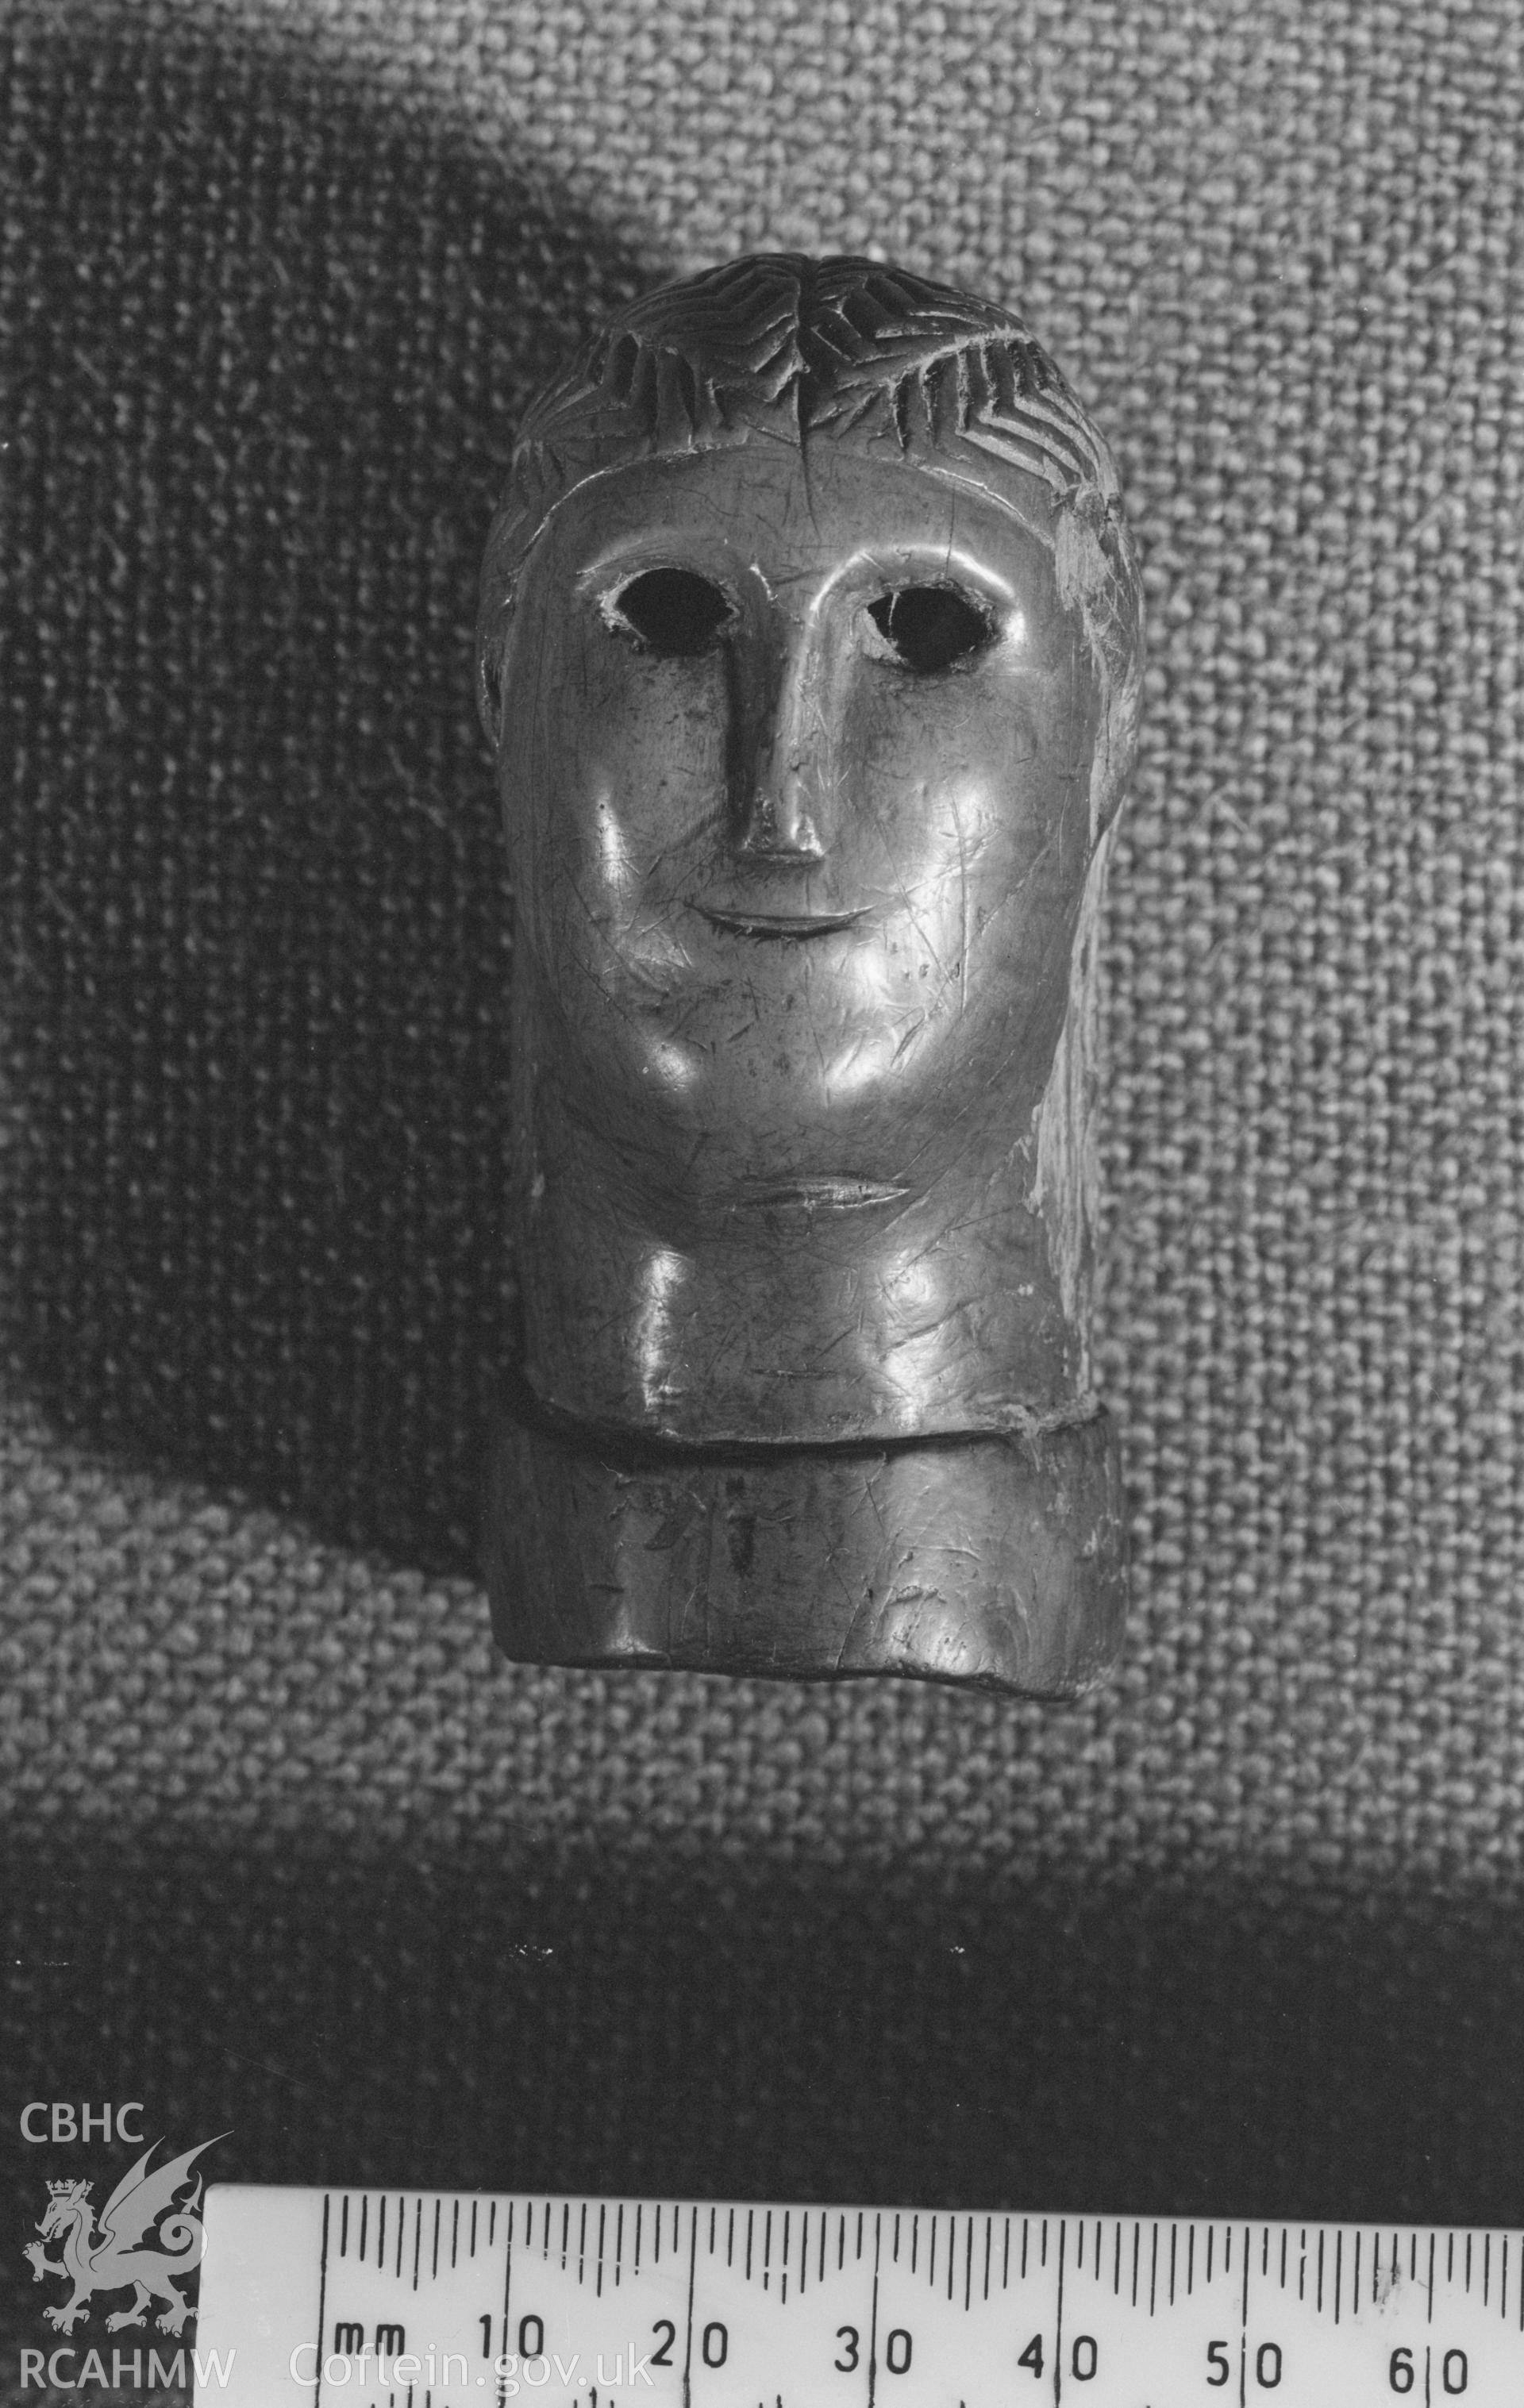 Digital copy of a photo showing a carved wooden head from Llanio Roman Fort.